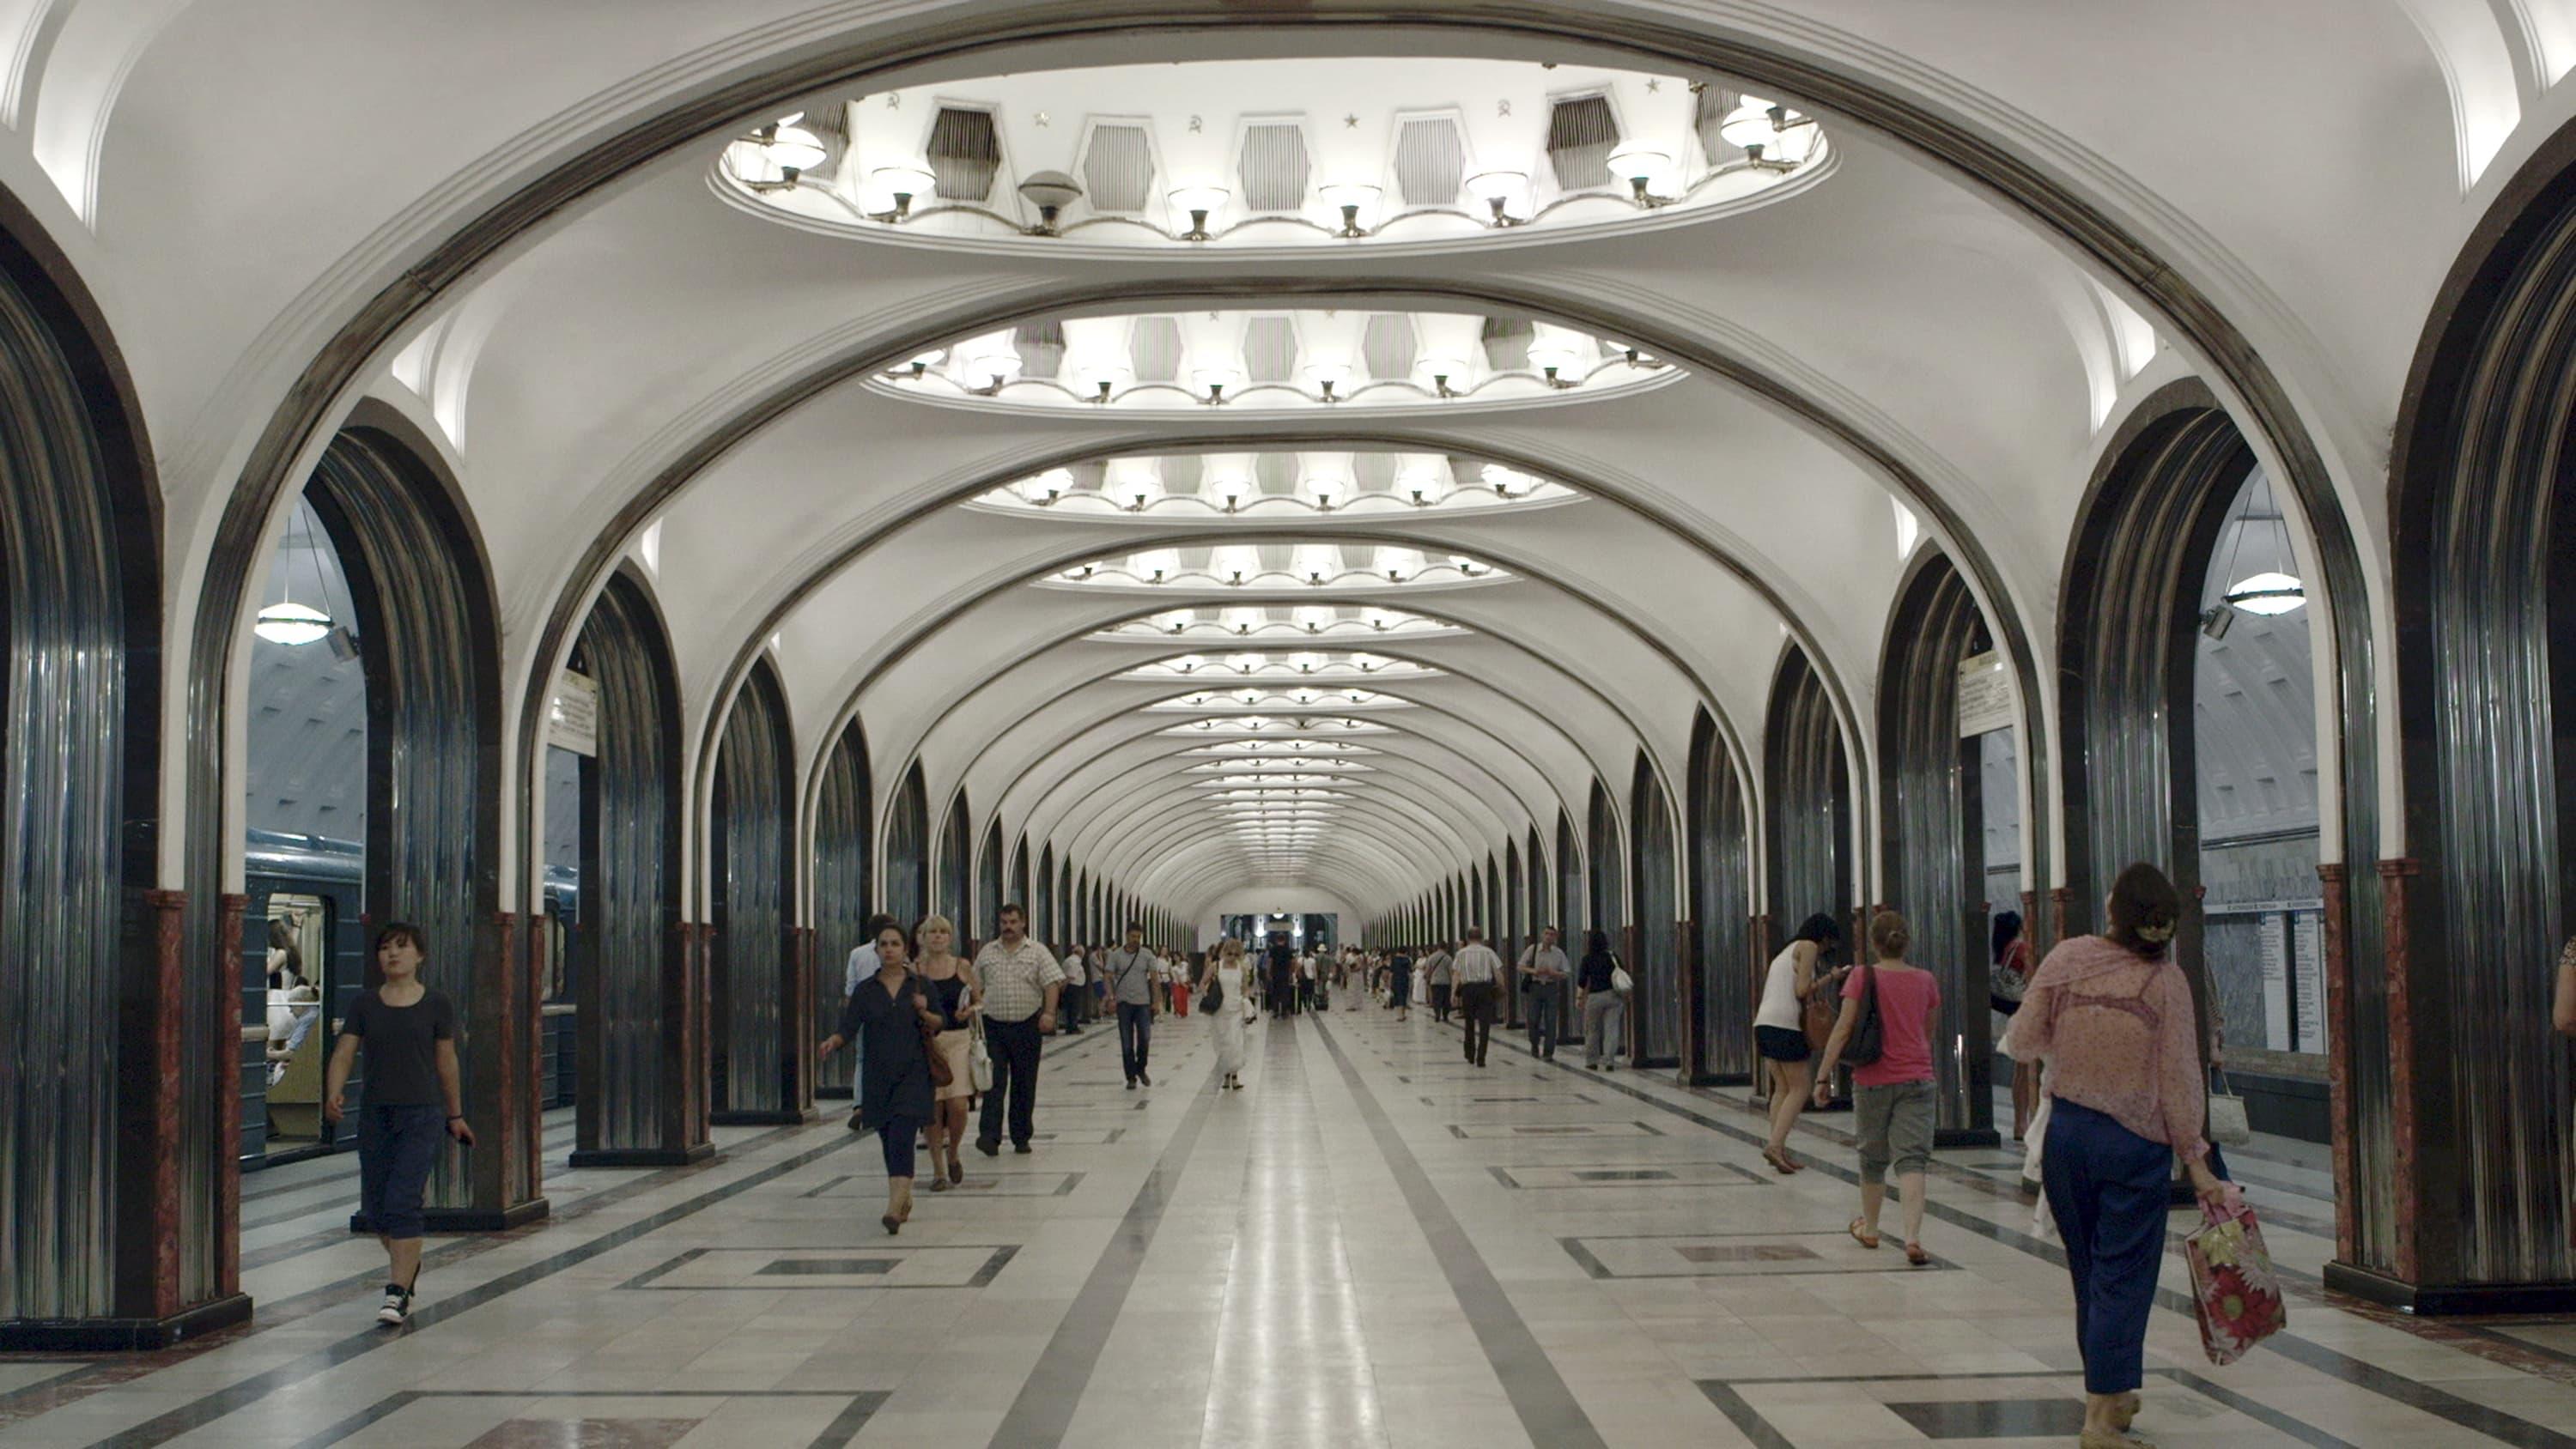 How we built the Moscow metro backdrop